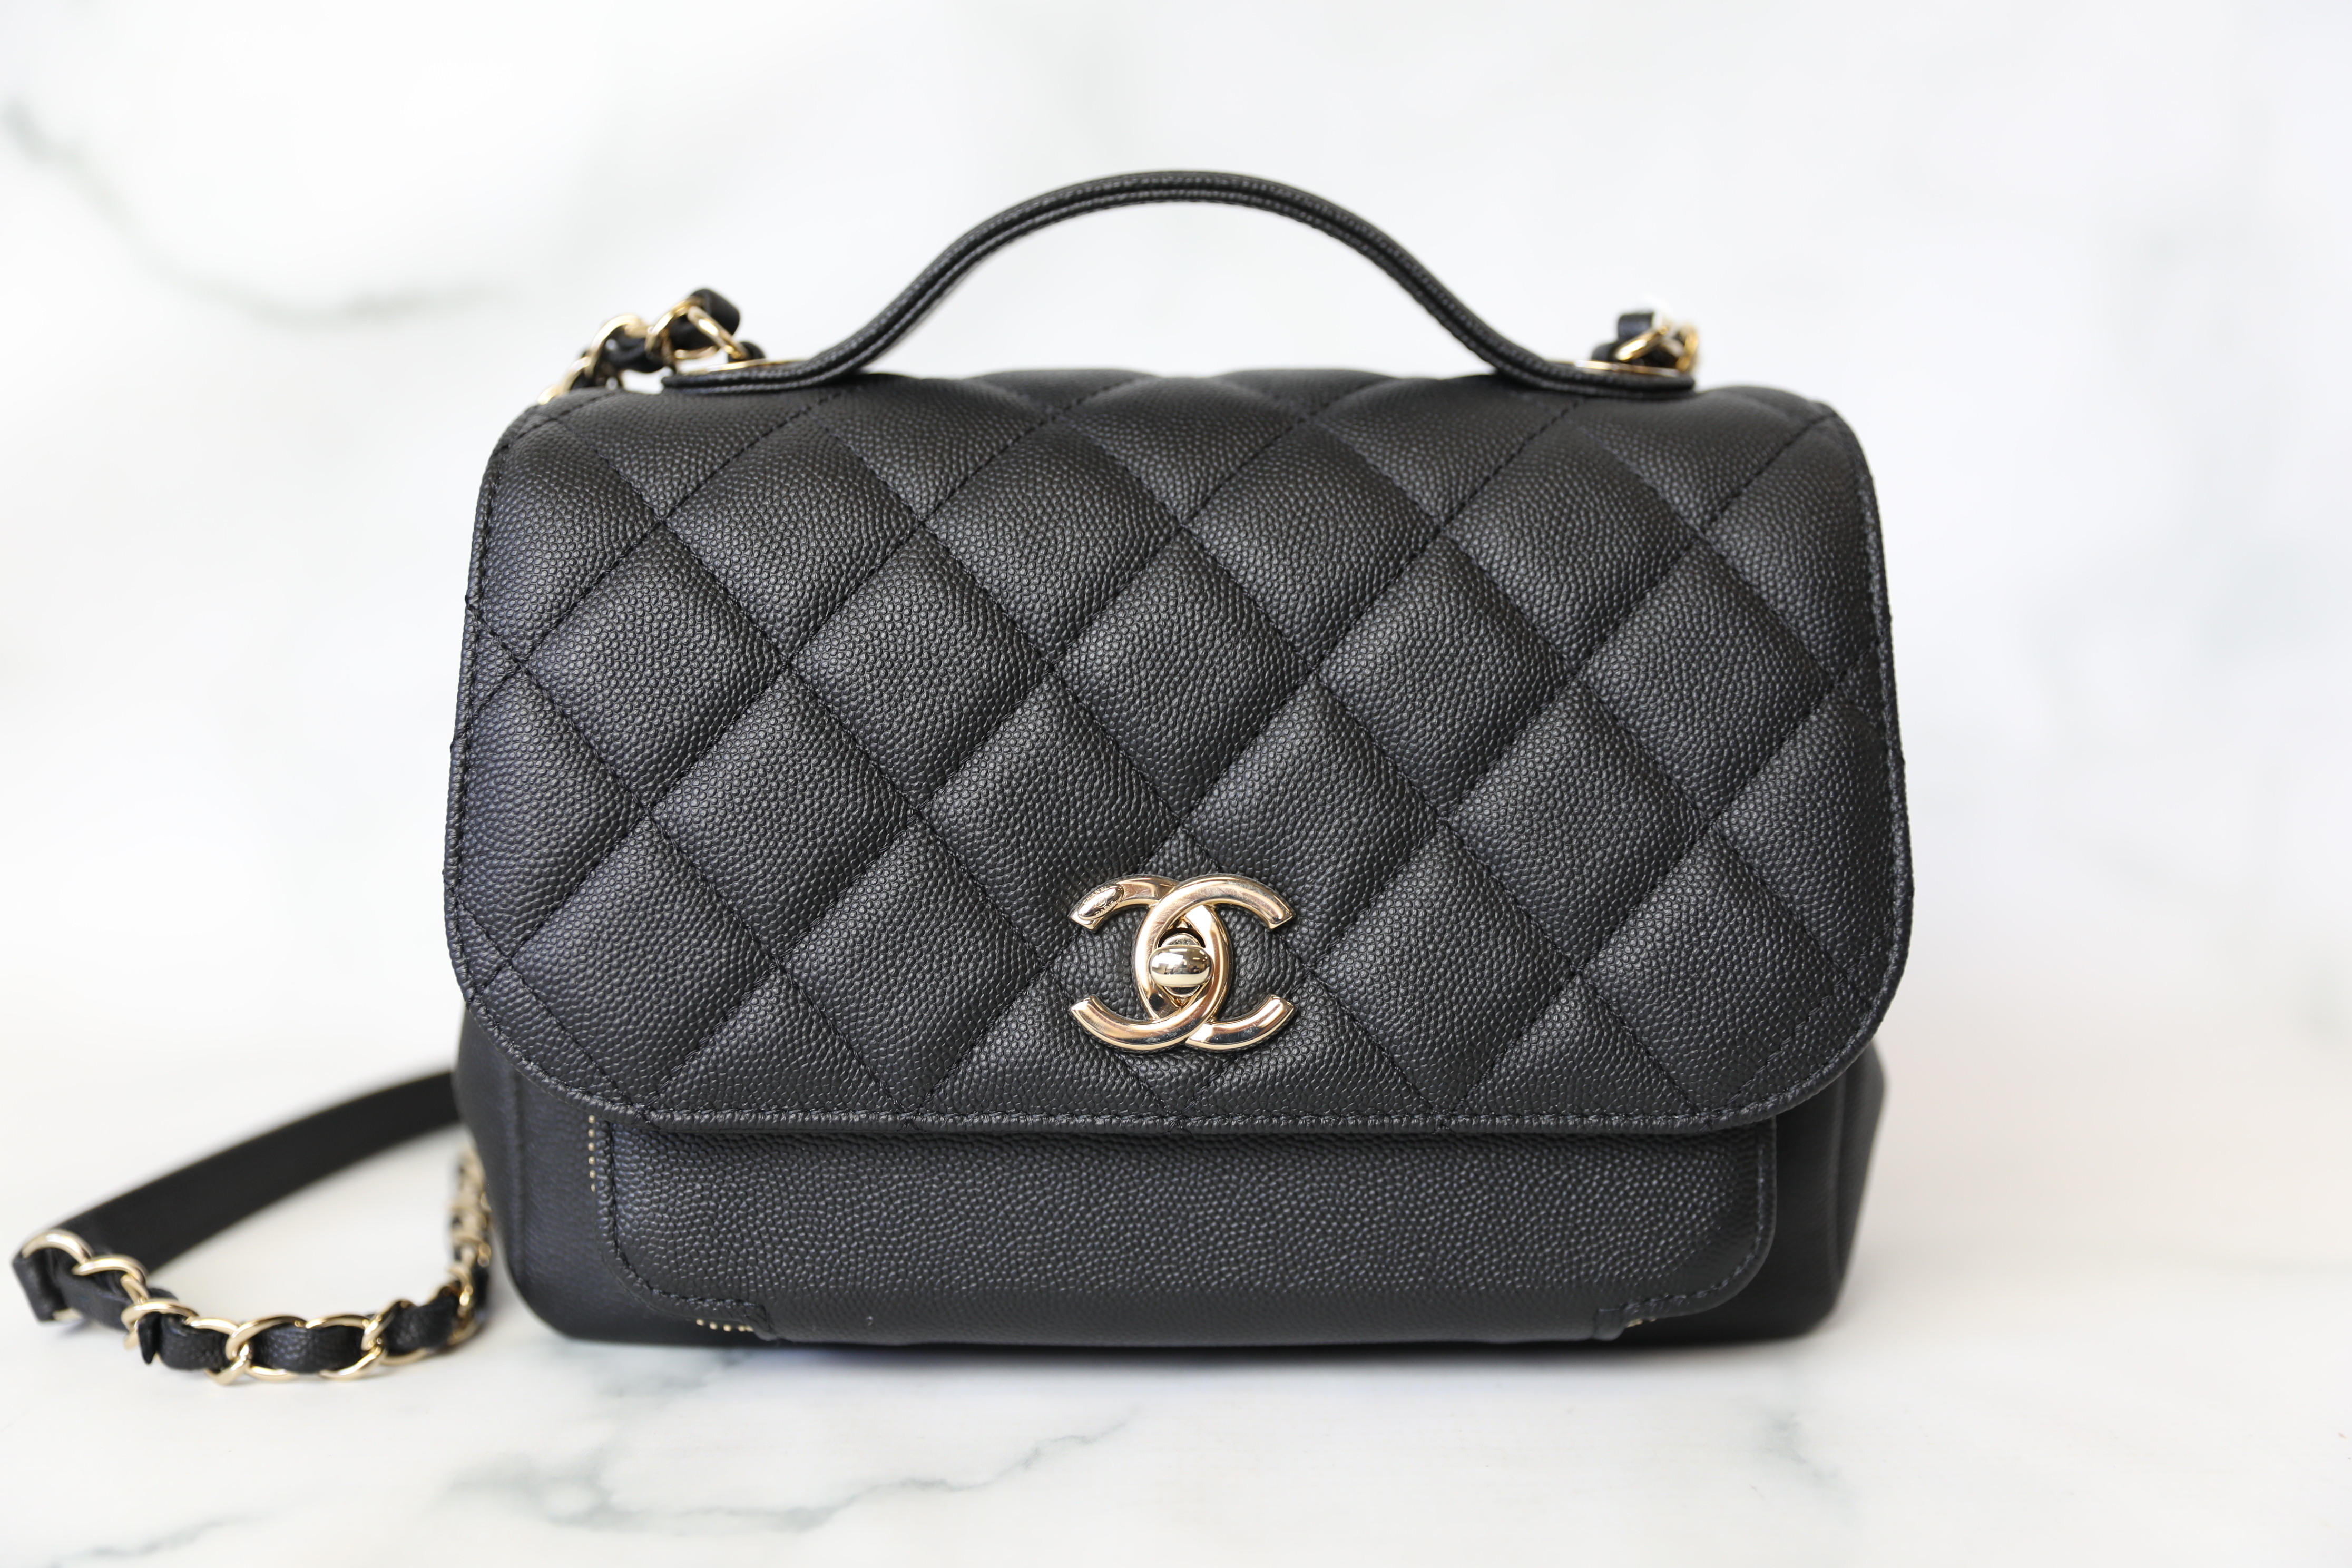 Chanel Business Affinity Medium, Black Caviar Leather With Gold Hardware,  New in Dustbag WA001 - Julia Rose Boston